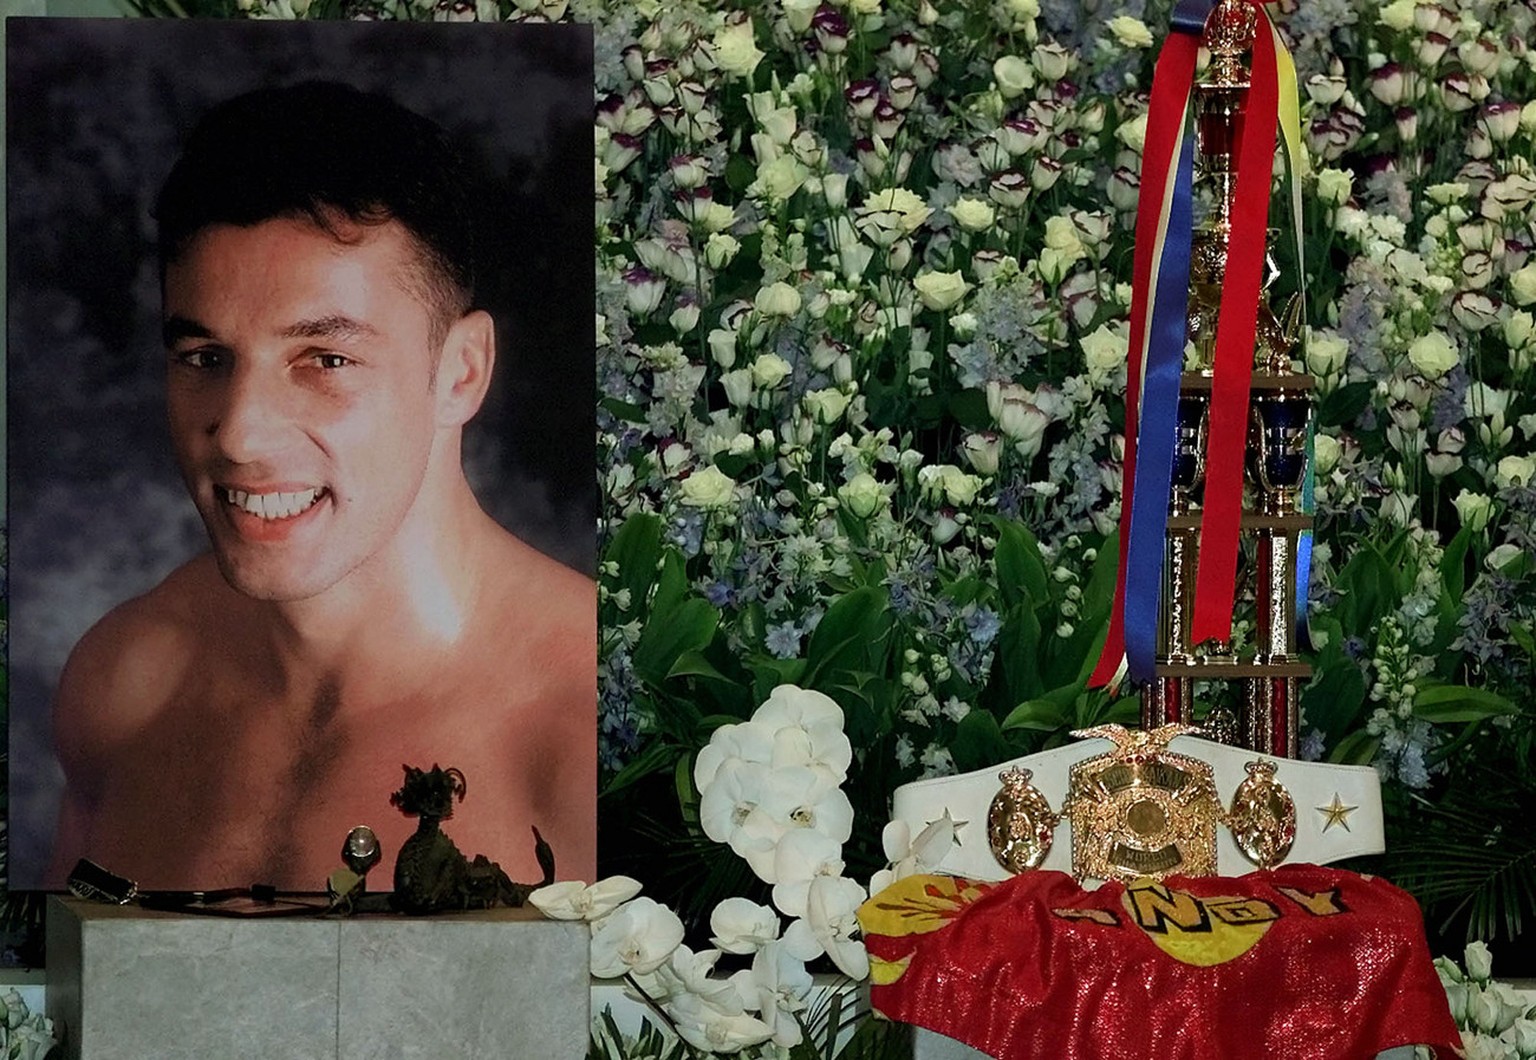 Swiss world kickboxing champion Andy Hug smiles in a picture next to his 1996 K-1 grad prix trophy on the altar during his wake at a Tokyo Buddhist temple Saturday, August 26, 2000. Hug died from an a ...